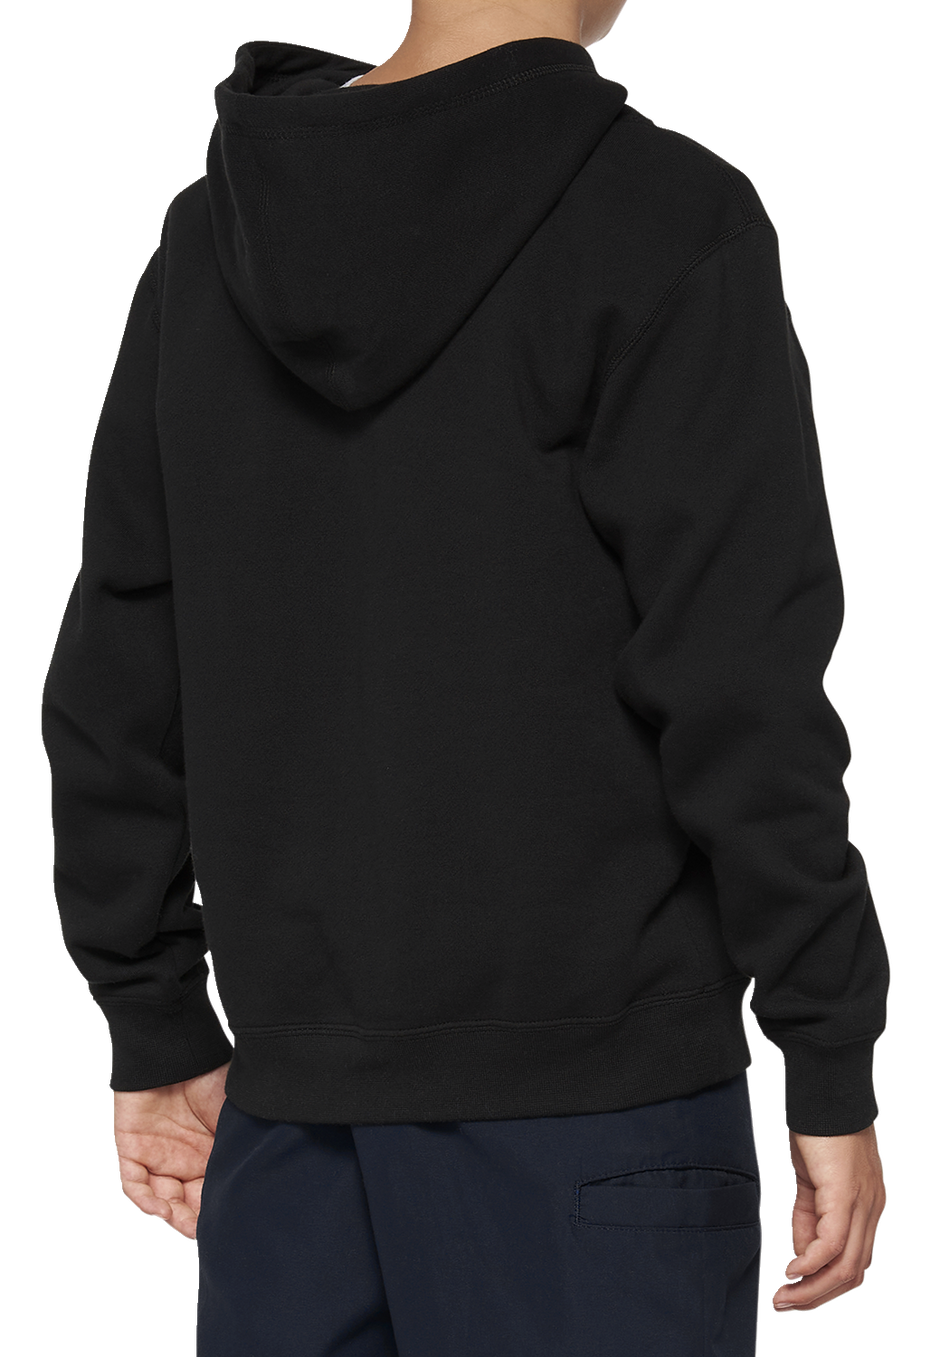 100% Youth Icon Hoodie - Black - Small 20030-00000